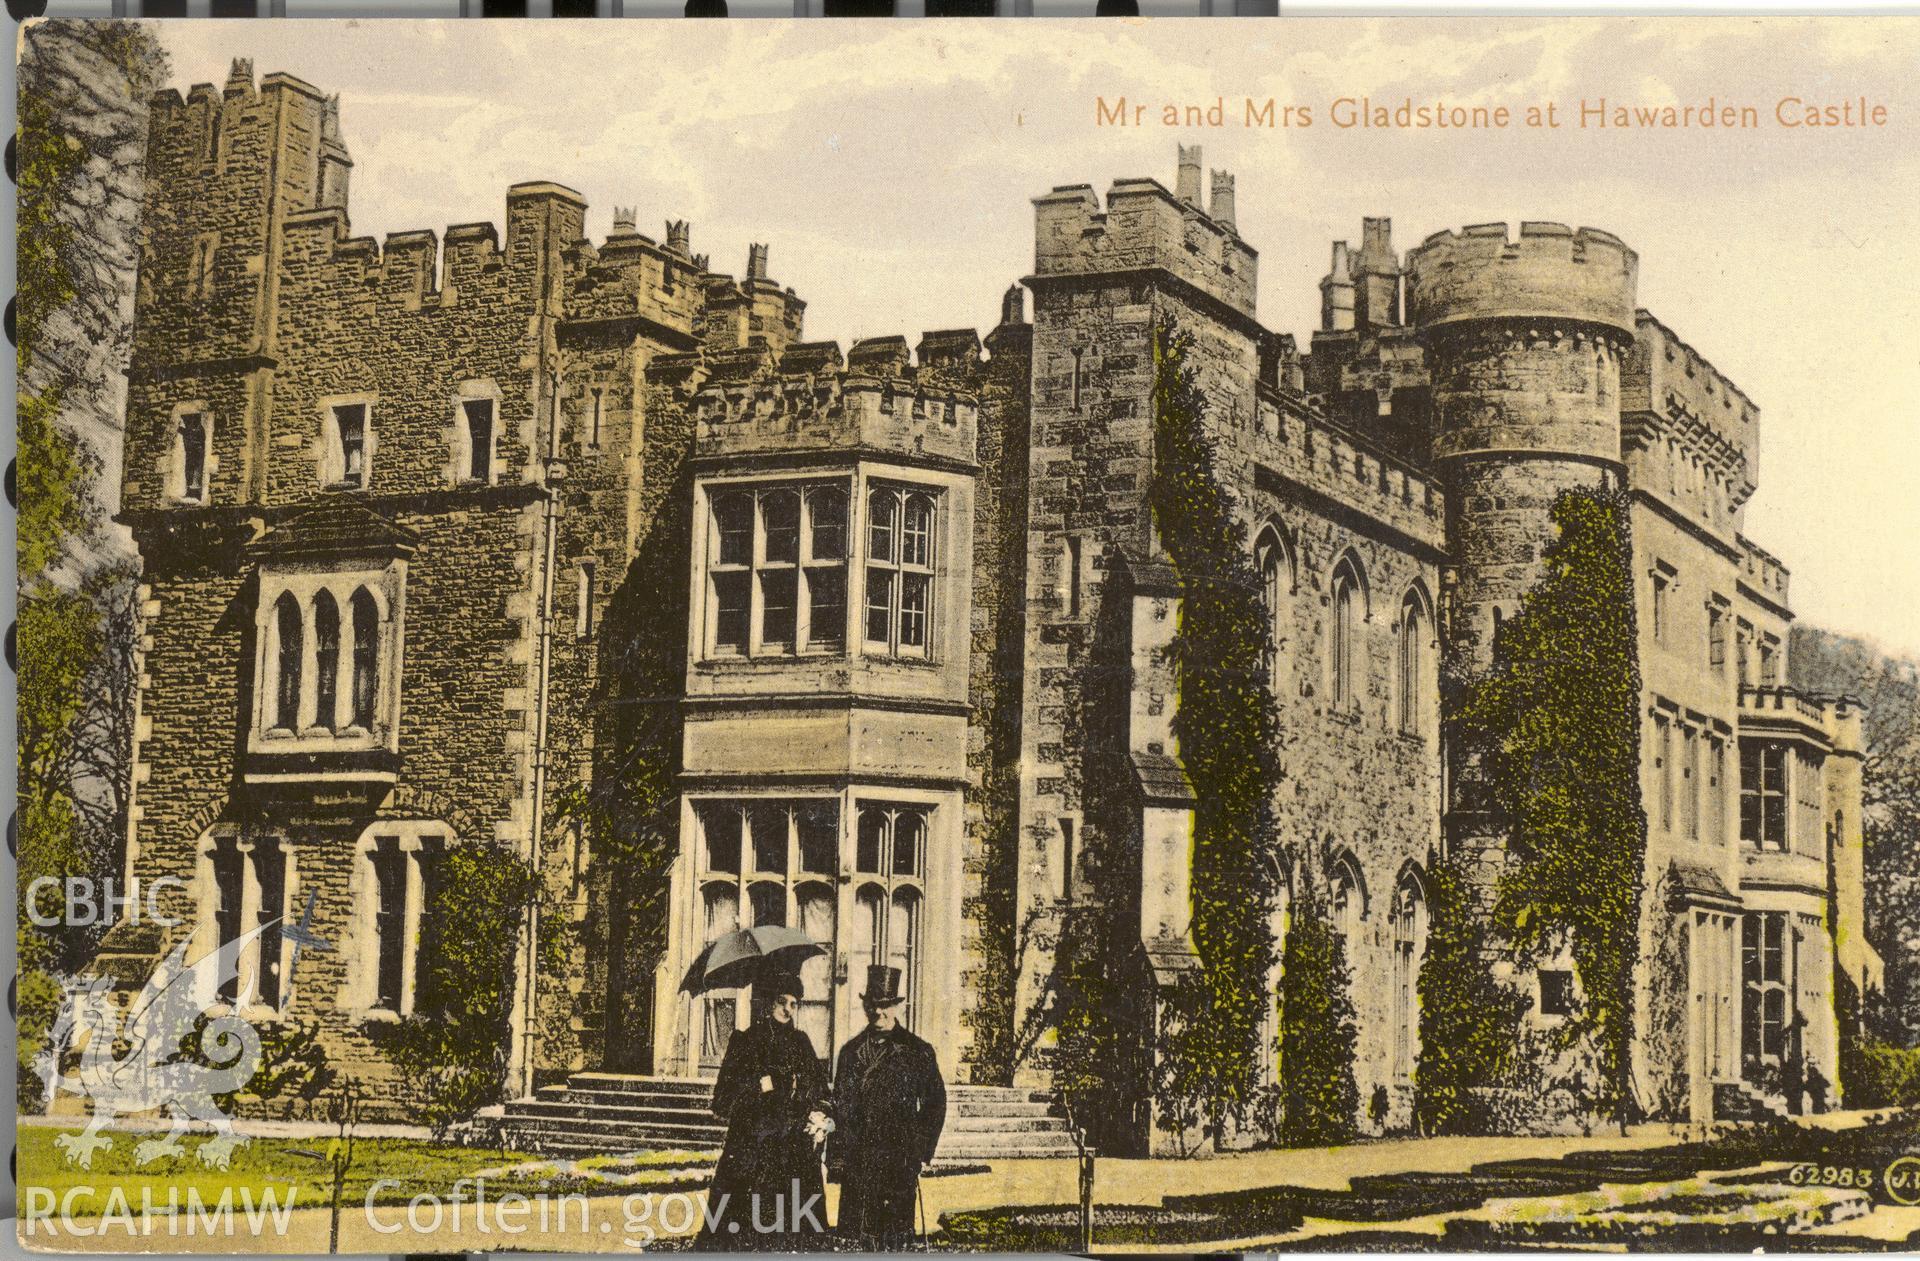 Digitised postcard image of Hawarden Castle, Valentine's Series. Produced by Parks and Gardens Data Services, from an original item in the Peter Davis Collection at Parks and Gardens UK. We hold only web-resolution images of this collection, suitable for viewing on screen and for research purposes only. We do not hold the original images, or publication quality scans.